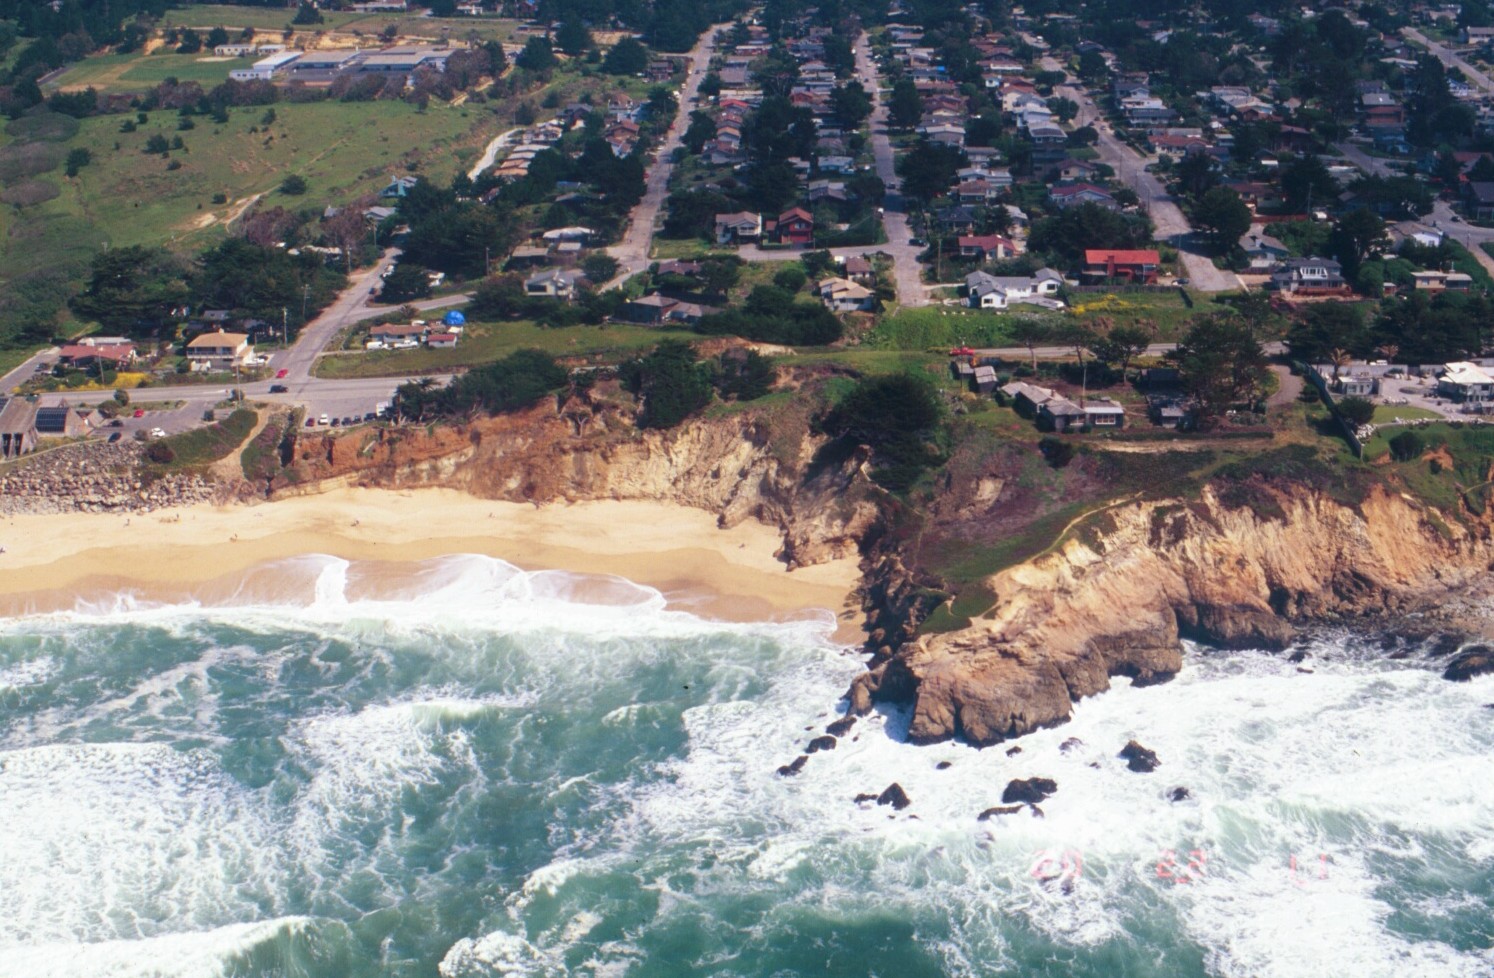 Photograph of the southern shore of Montara, California, dated April 1998.  (Photograph courtesy of the USGS)